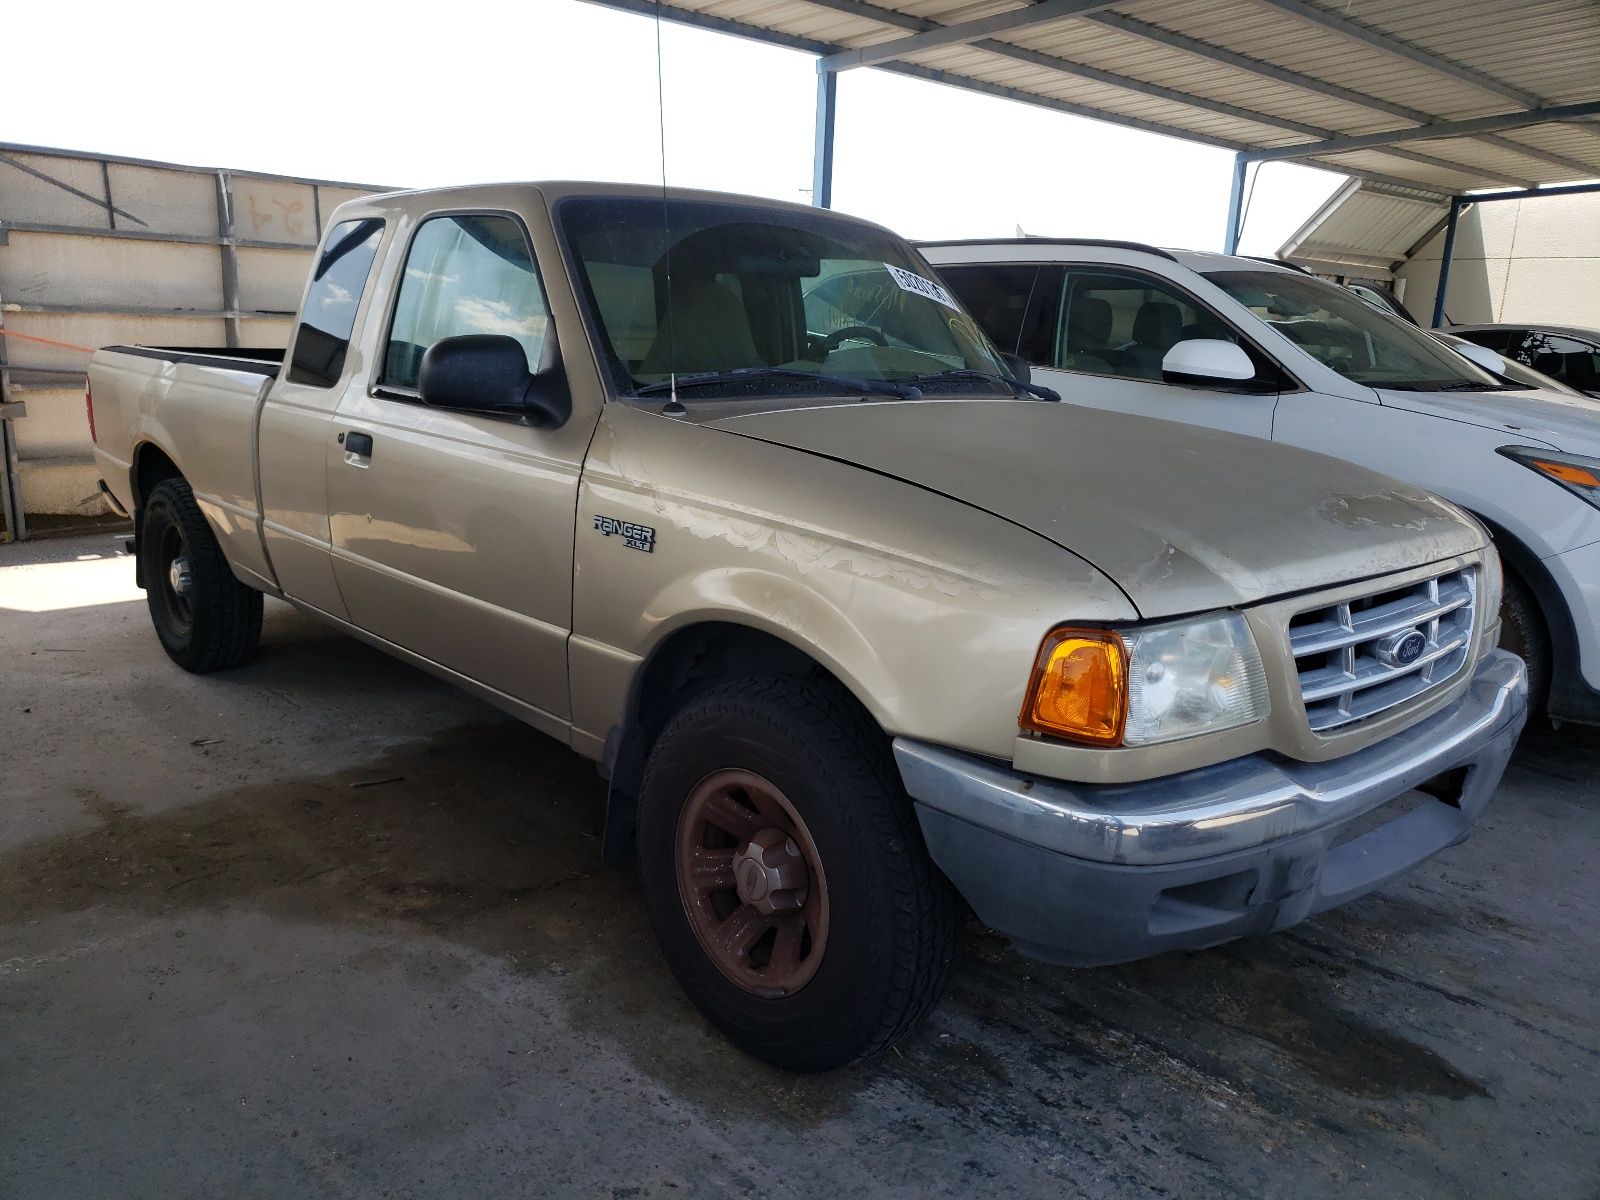 1 of 1FTYR14U01PA02903 Ford Ranger 2001